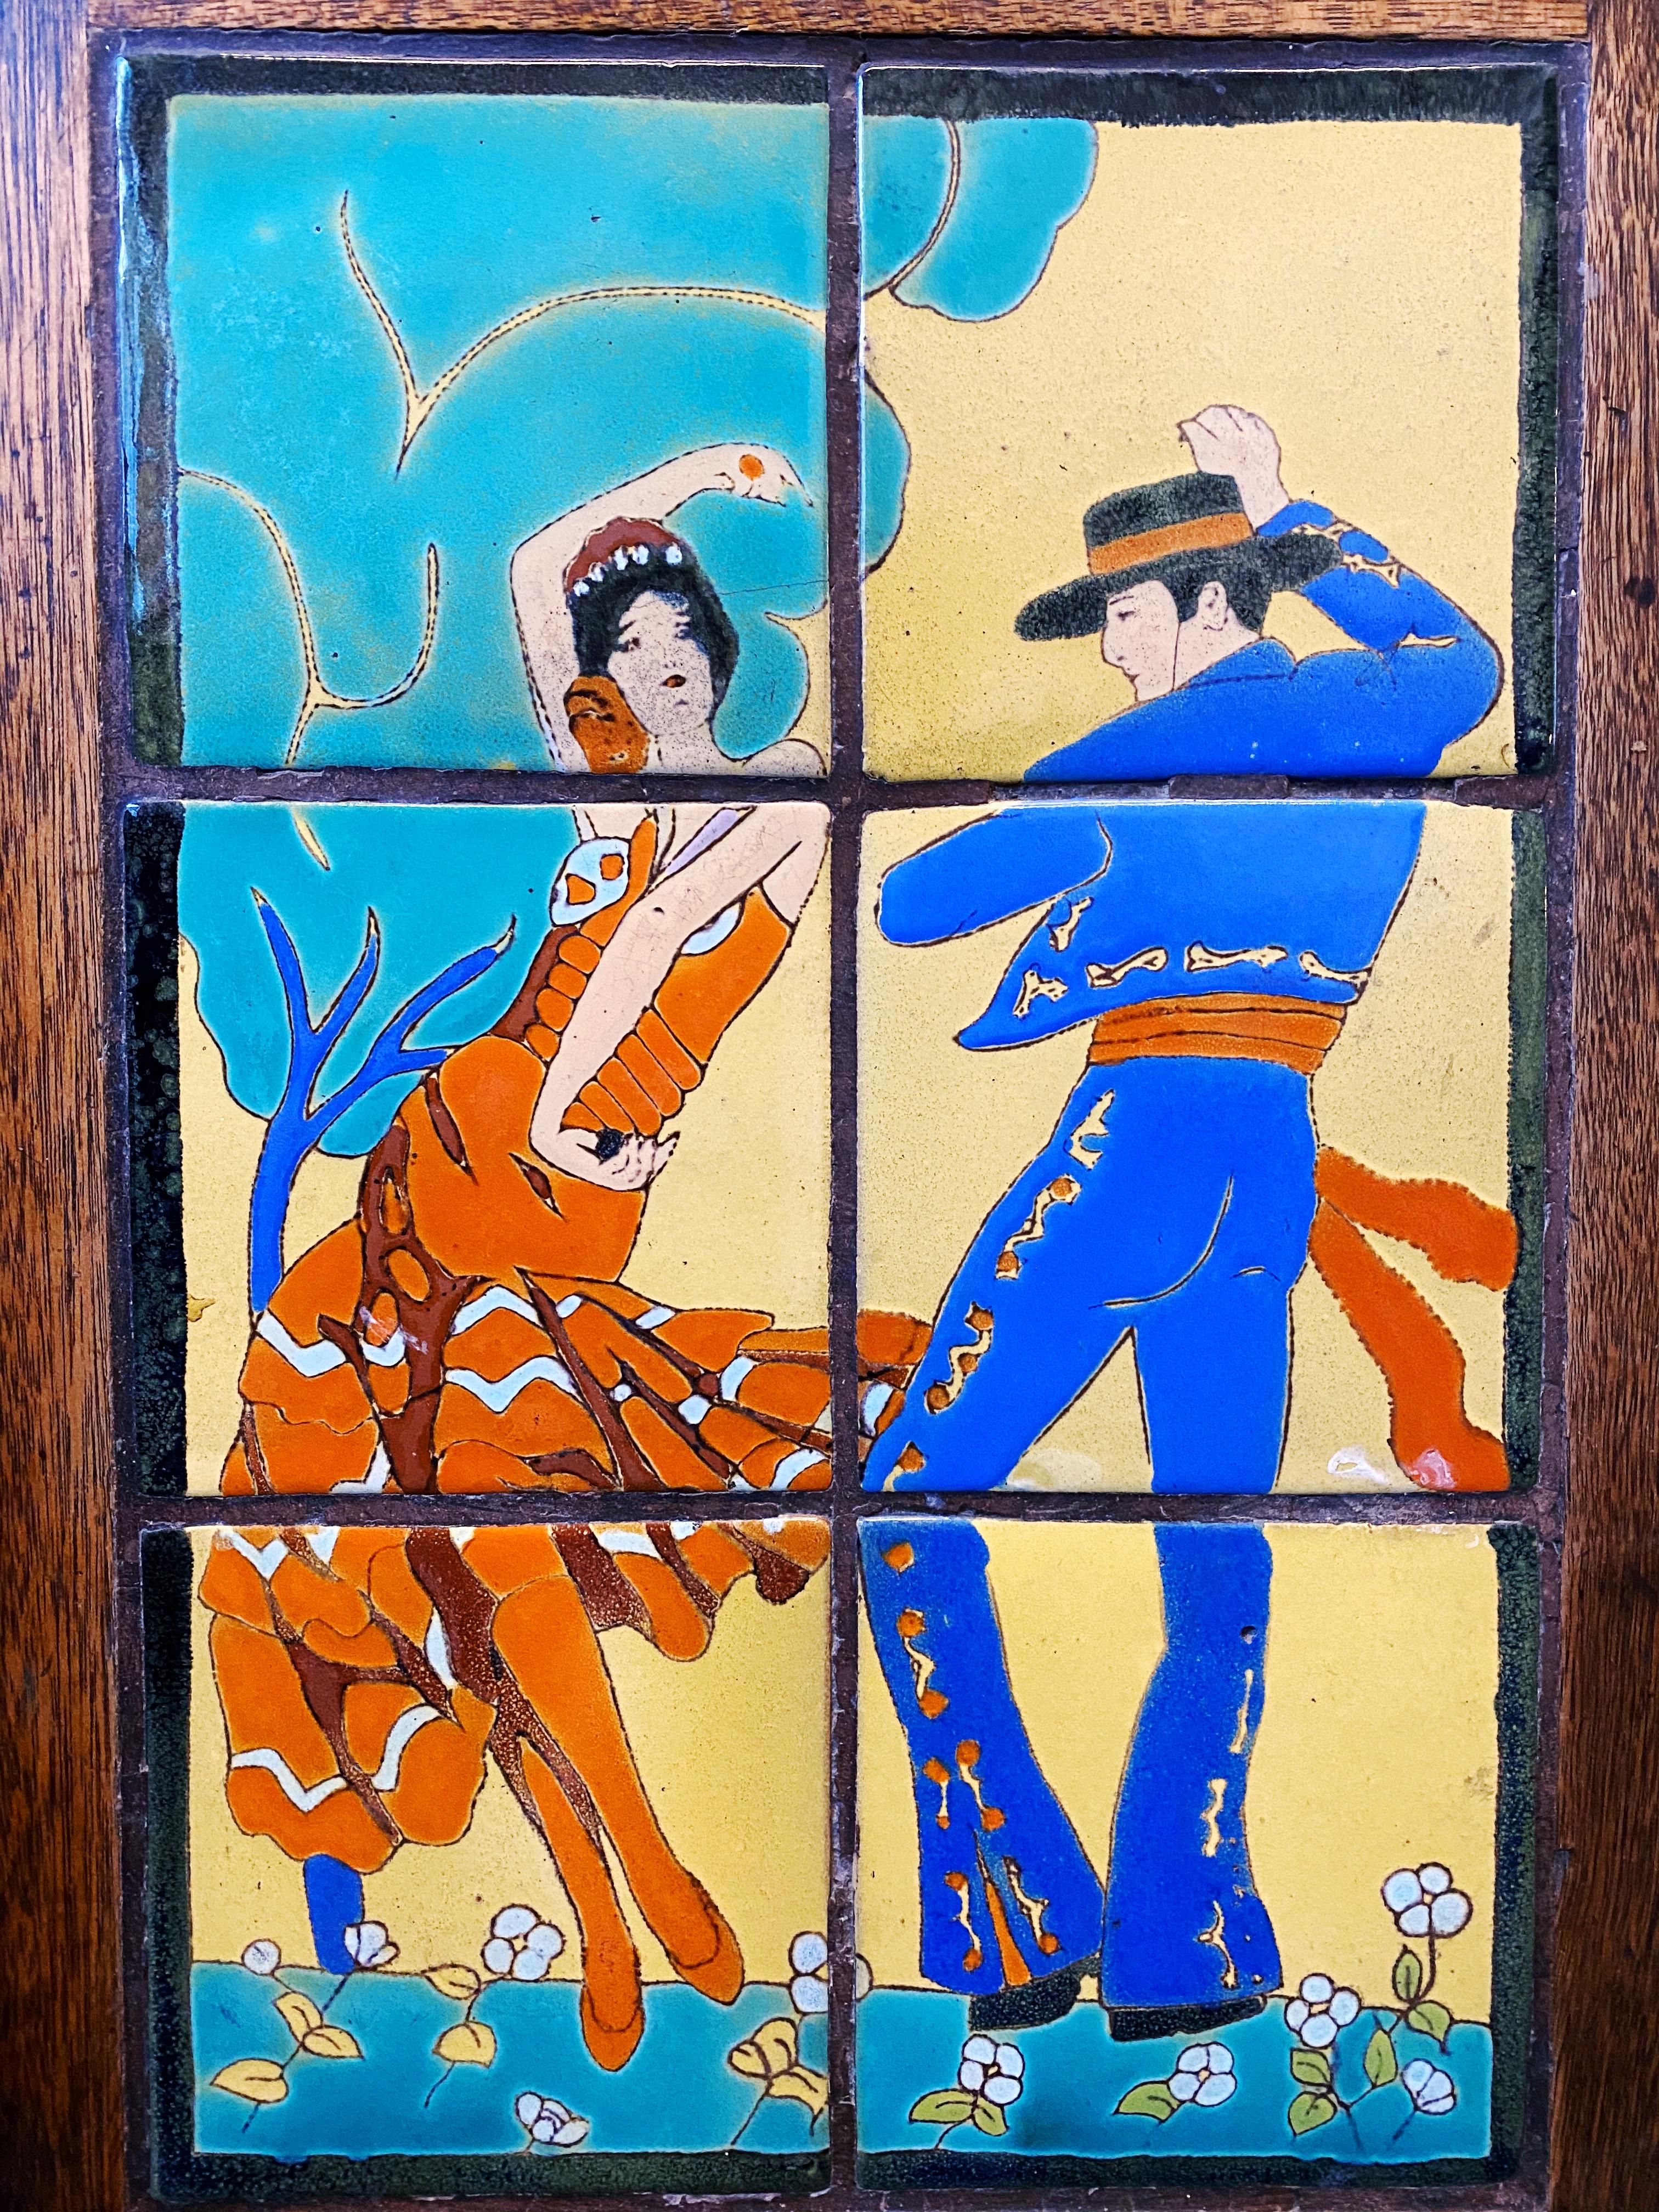 This Flamenco dancers tile table by Tayler Tilery is in excellent condition. Wear is consistent with age and use.
Taylor Tilery (1930-1941, also known as Santa Monica Brick Company) produced at least a dozen designs depicting Spanish and Mexican